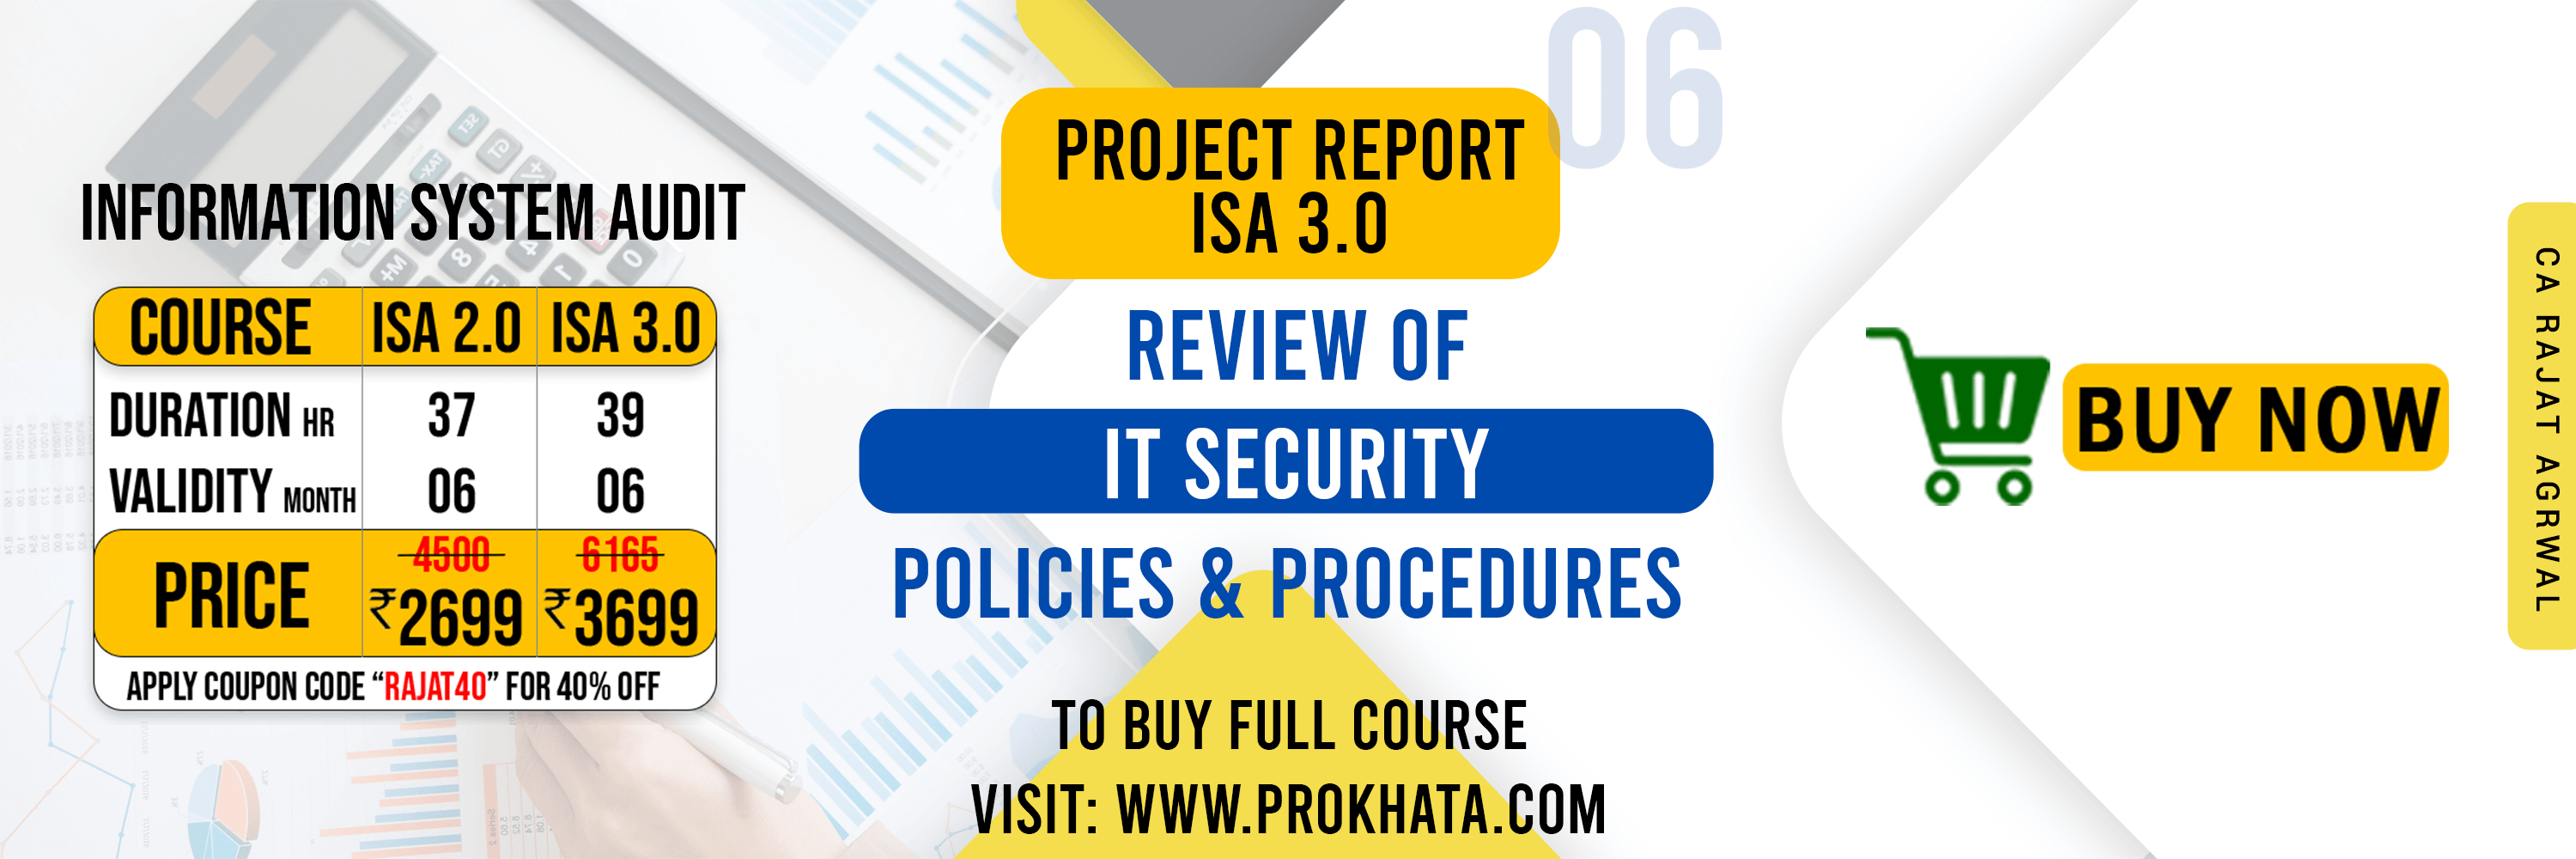 Project Report 06 Review of IT Security Policies and Procedures